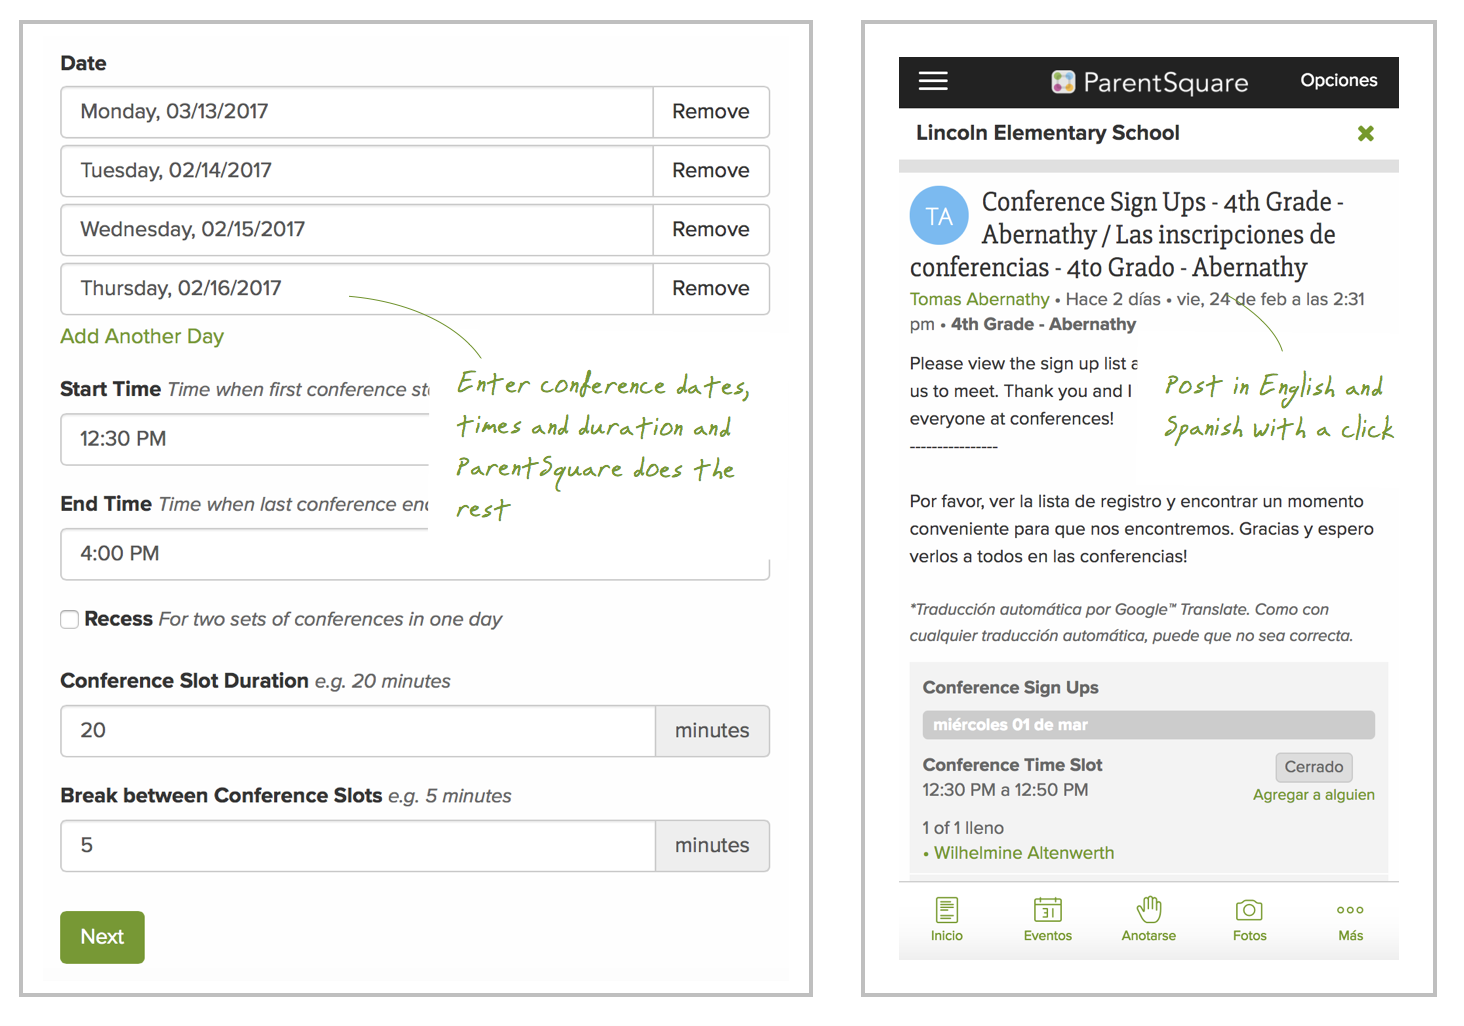 Screenshot of Appointment Sign Ups form in ParentSquare